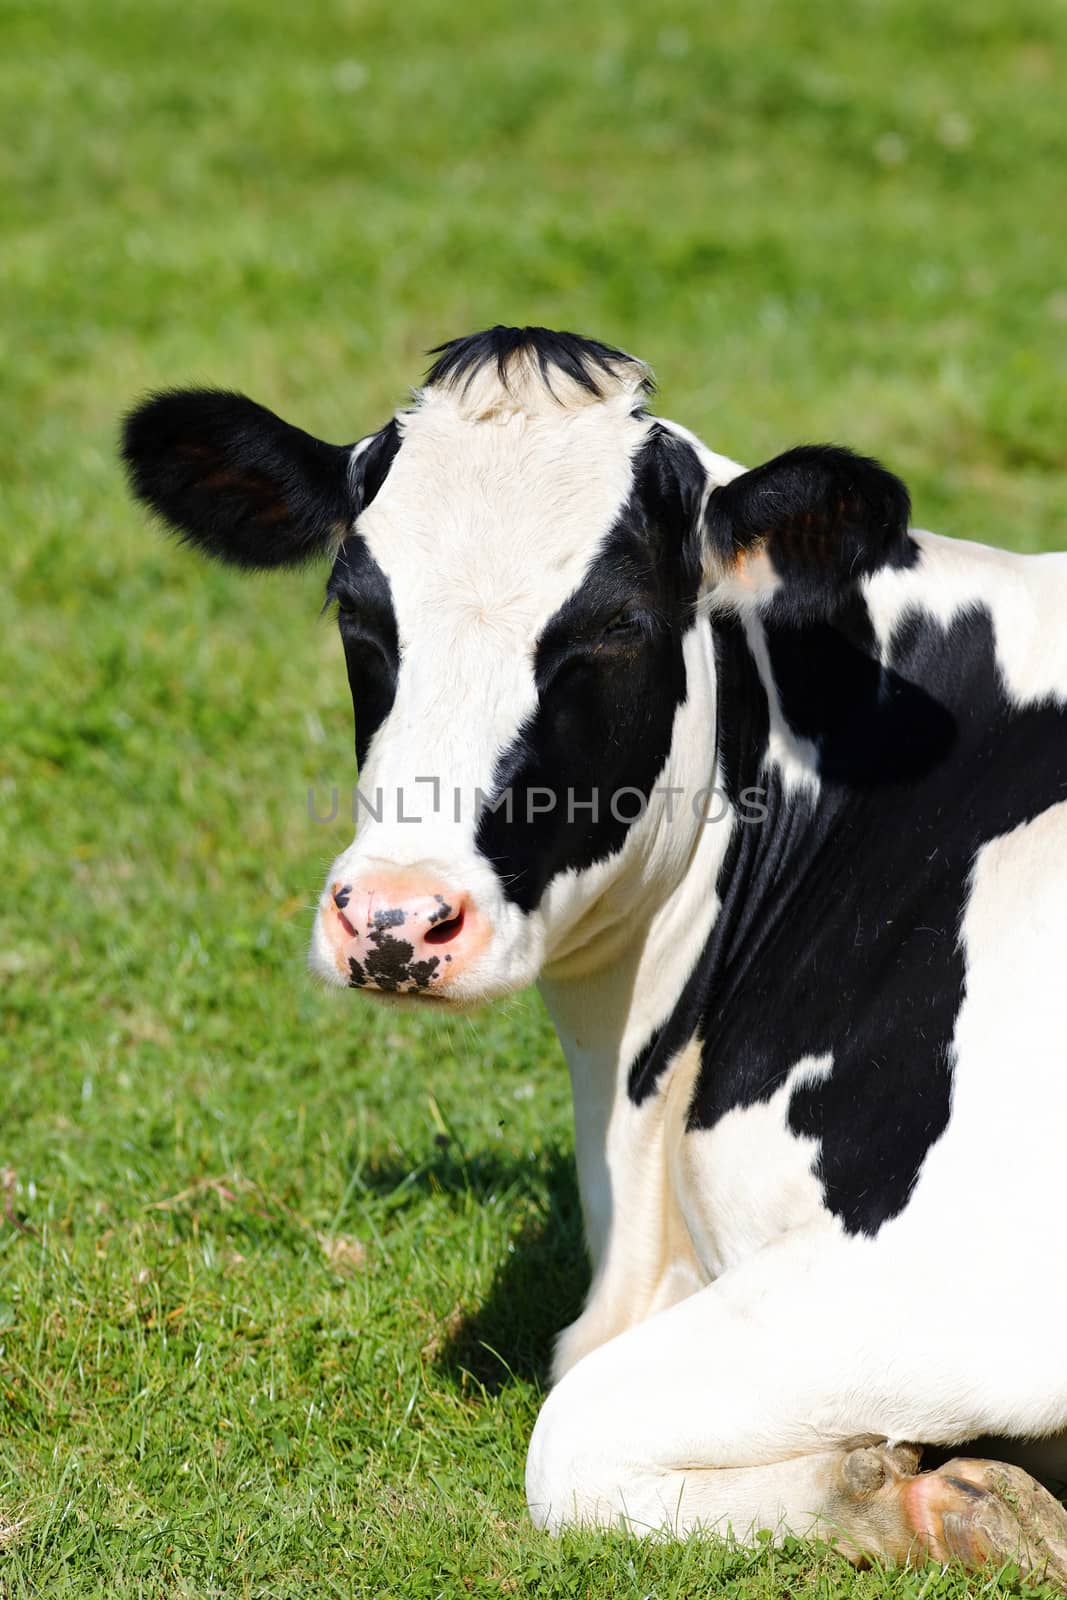 Black and white cow lying down on green grass, vertical view